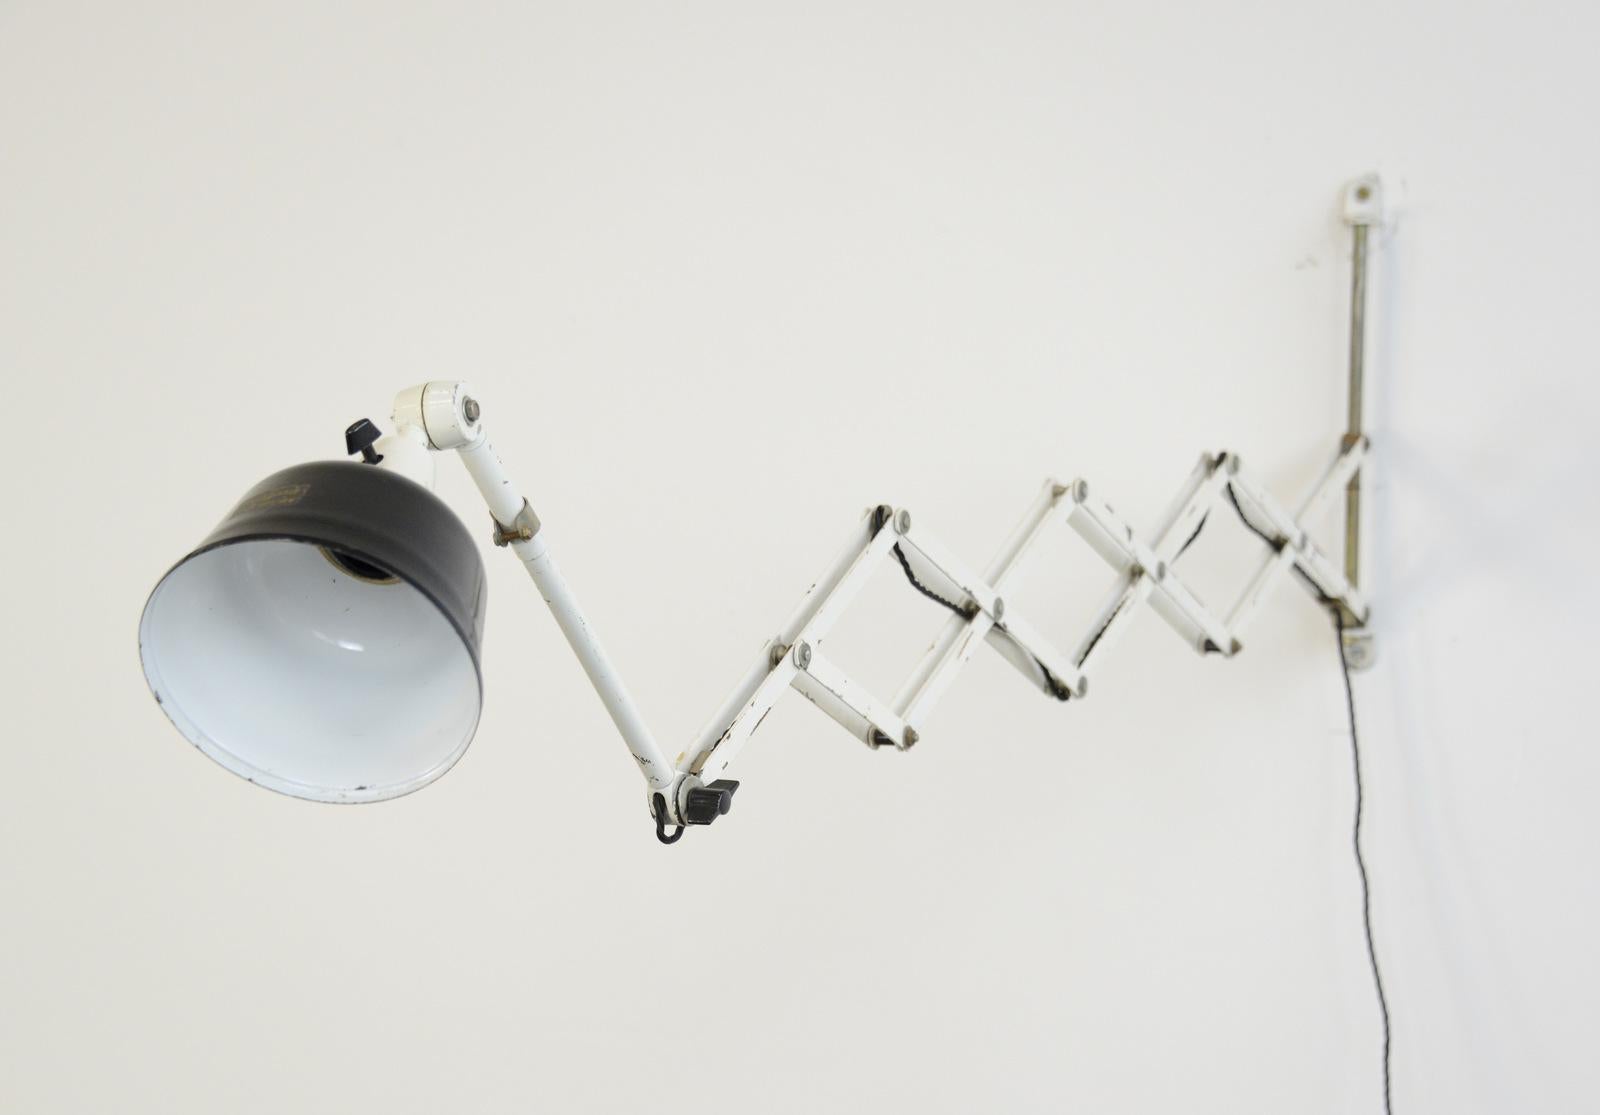 Steel Extra Large Wall-Mounted Scissor Lamp by Midgard, circa 1940s